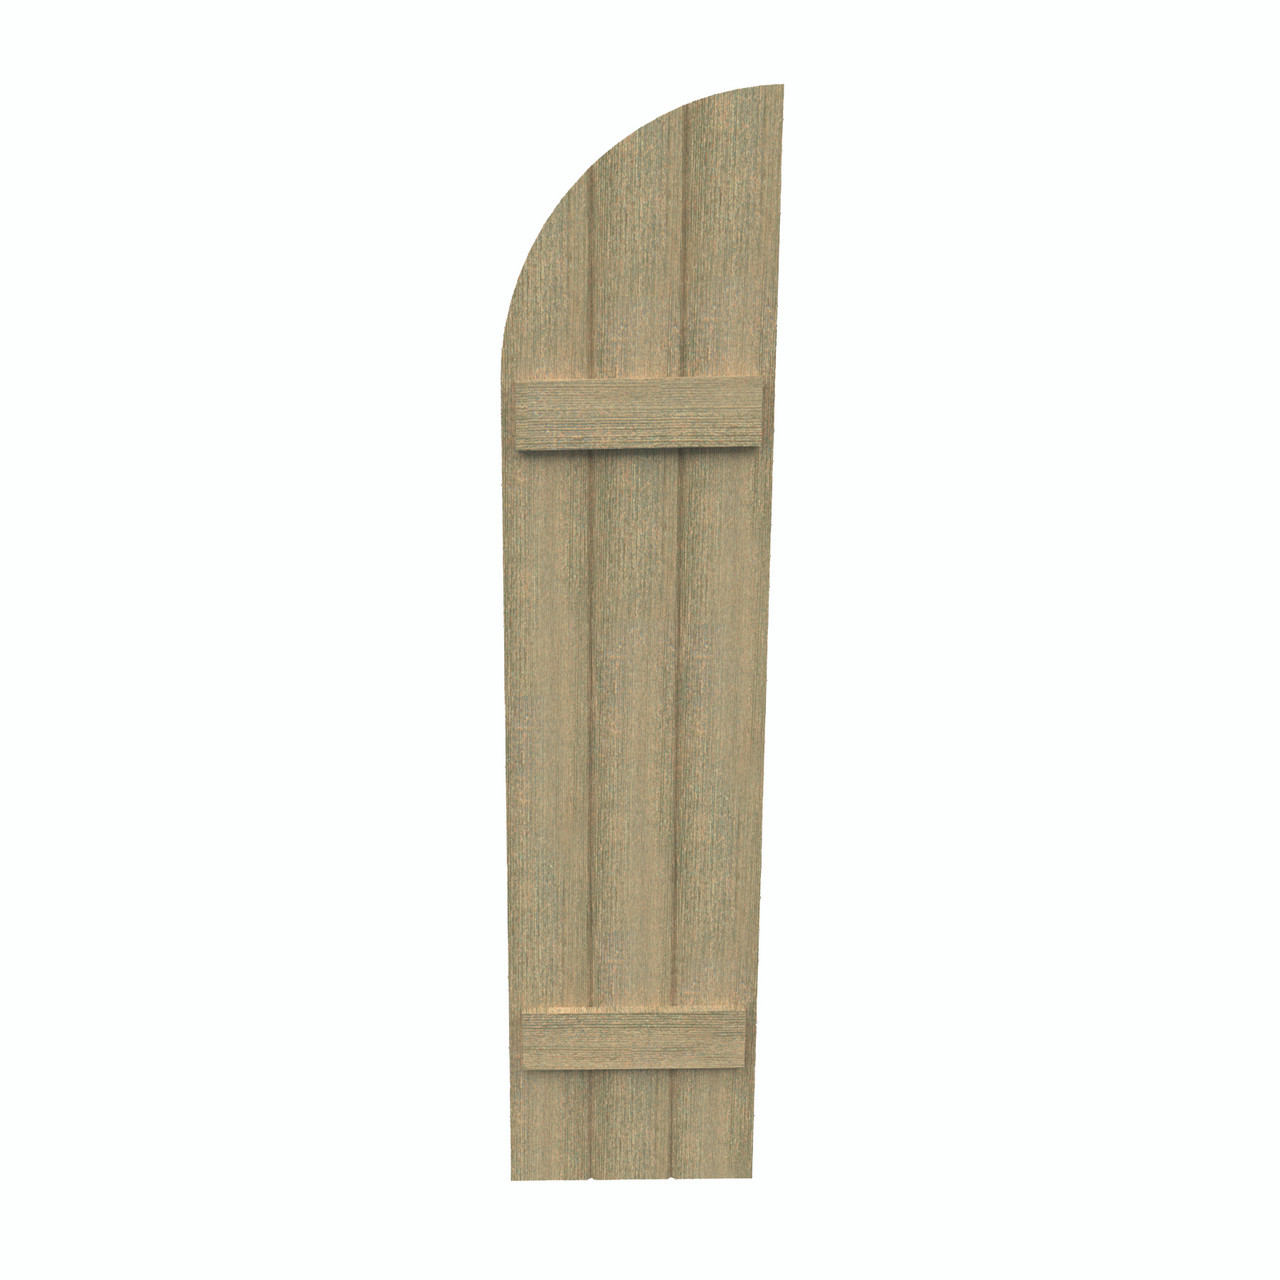 18 inch by 115 inch Quarter Round Shutter with 3-Boards